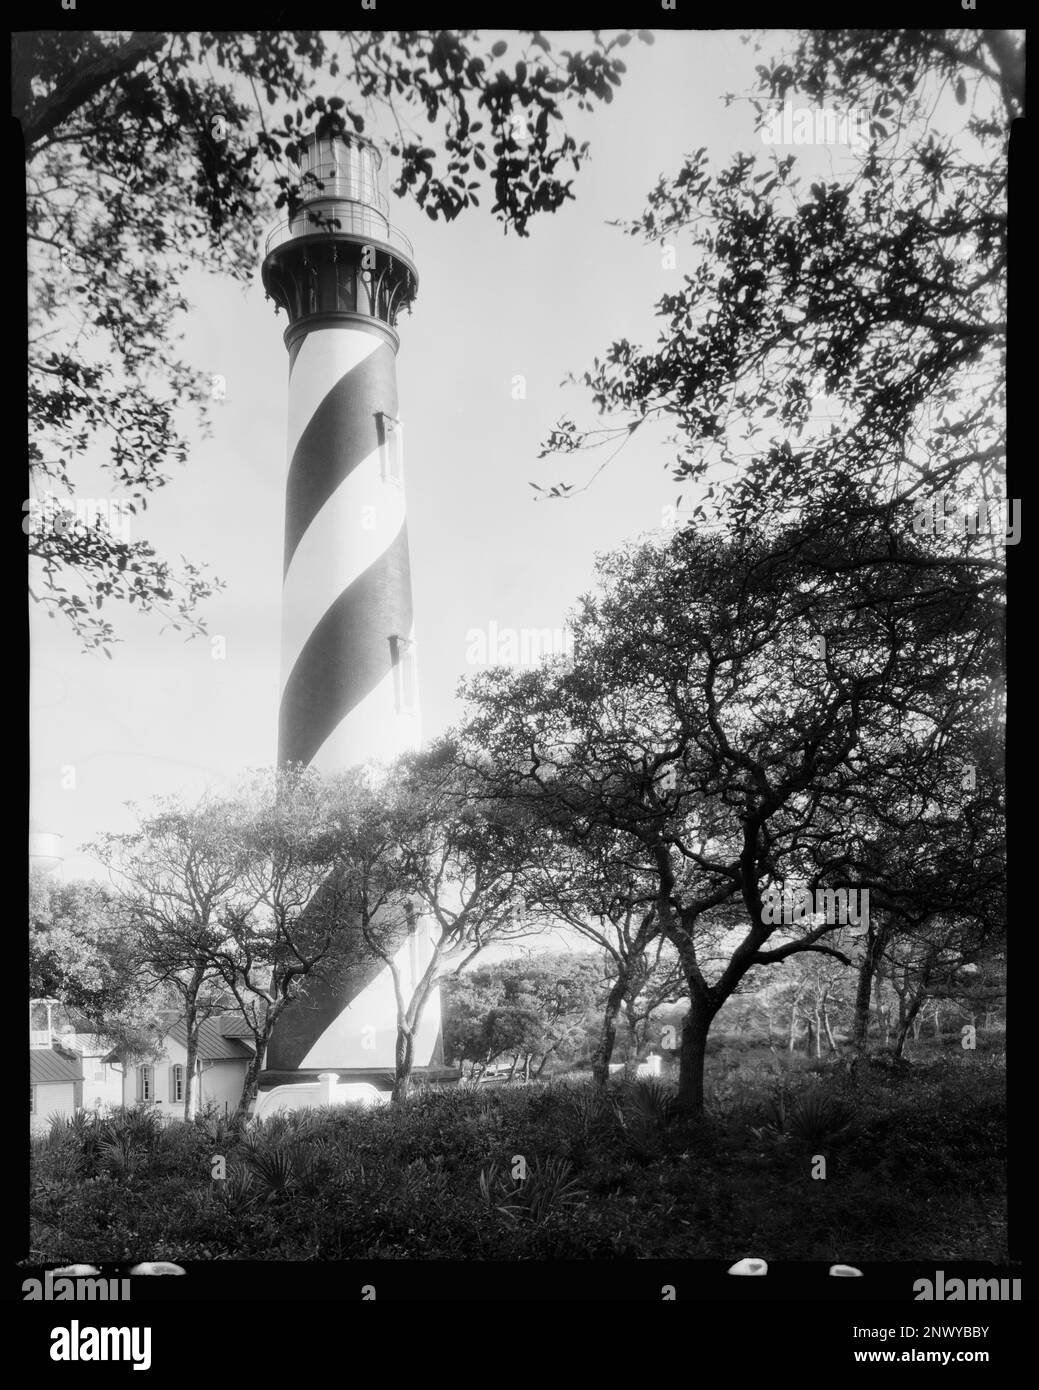 Light House, St. Augustine, St. Johns County, Florida. Carnegie Survey of the Architecture of the South. United States, Florida, St. Johns County, St. Augustine,  Lighthouses. Stock Photo